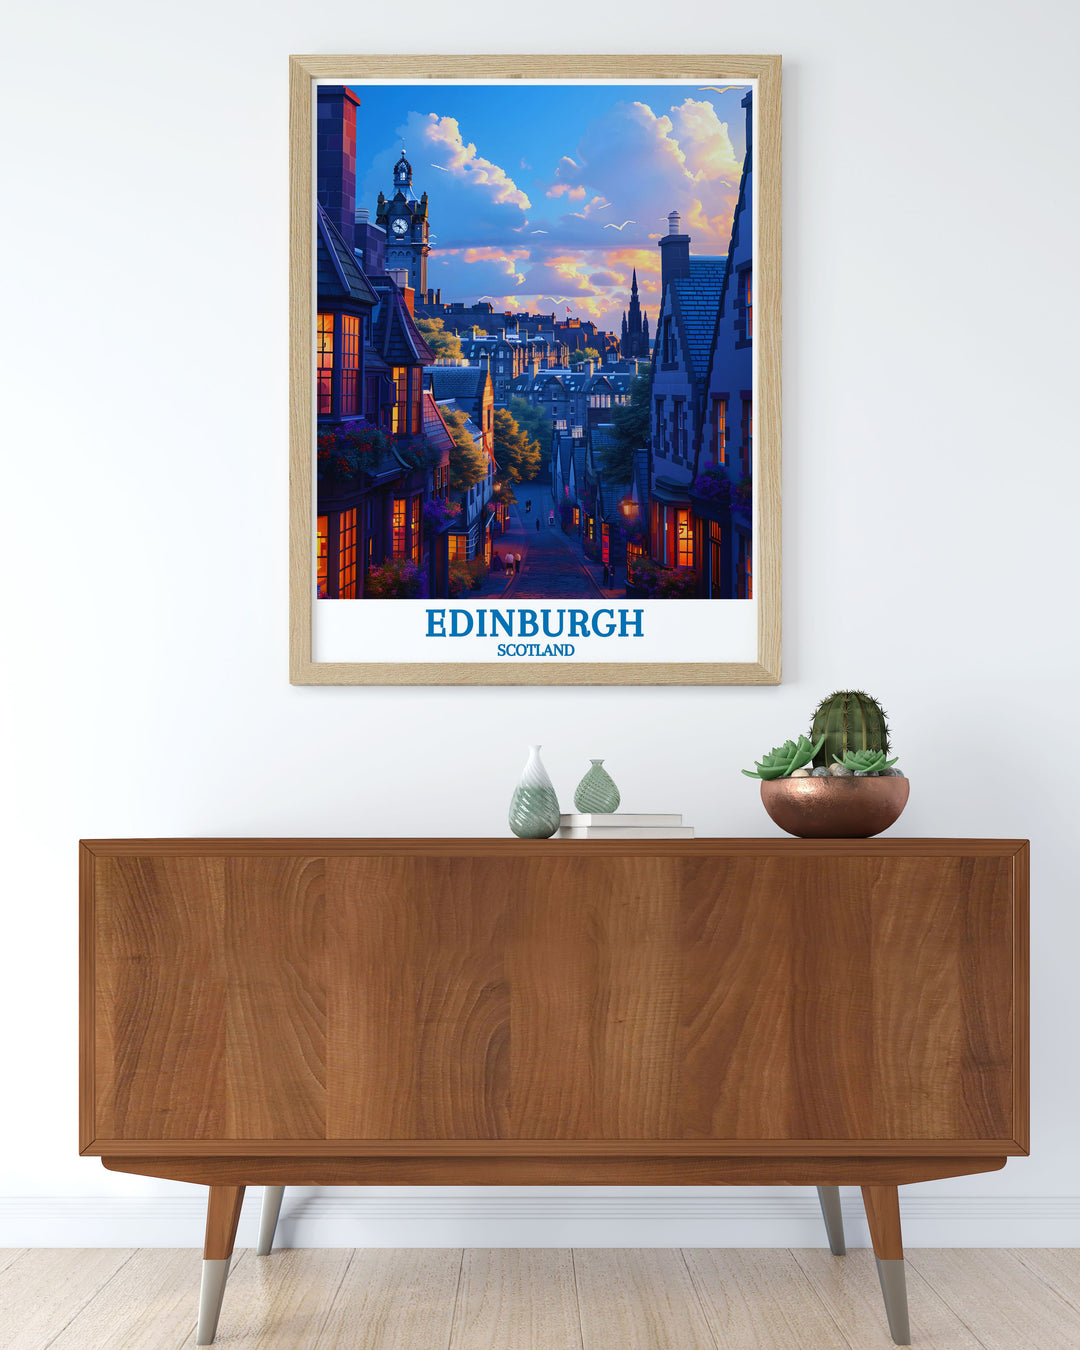 Travel poster of the Royal Mile, highlighting the vibrant atmosphere and medieval charm of this famous Edinburgh street.